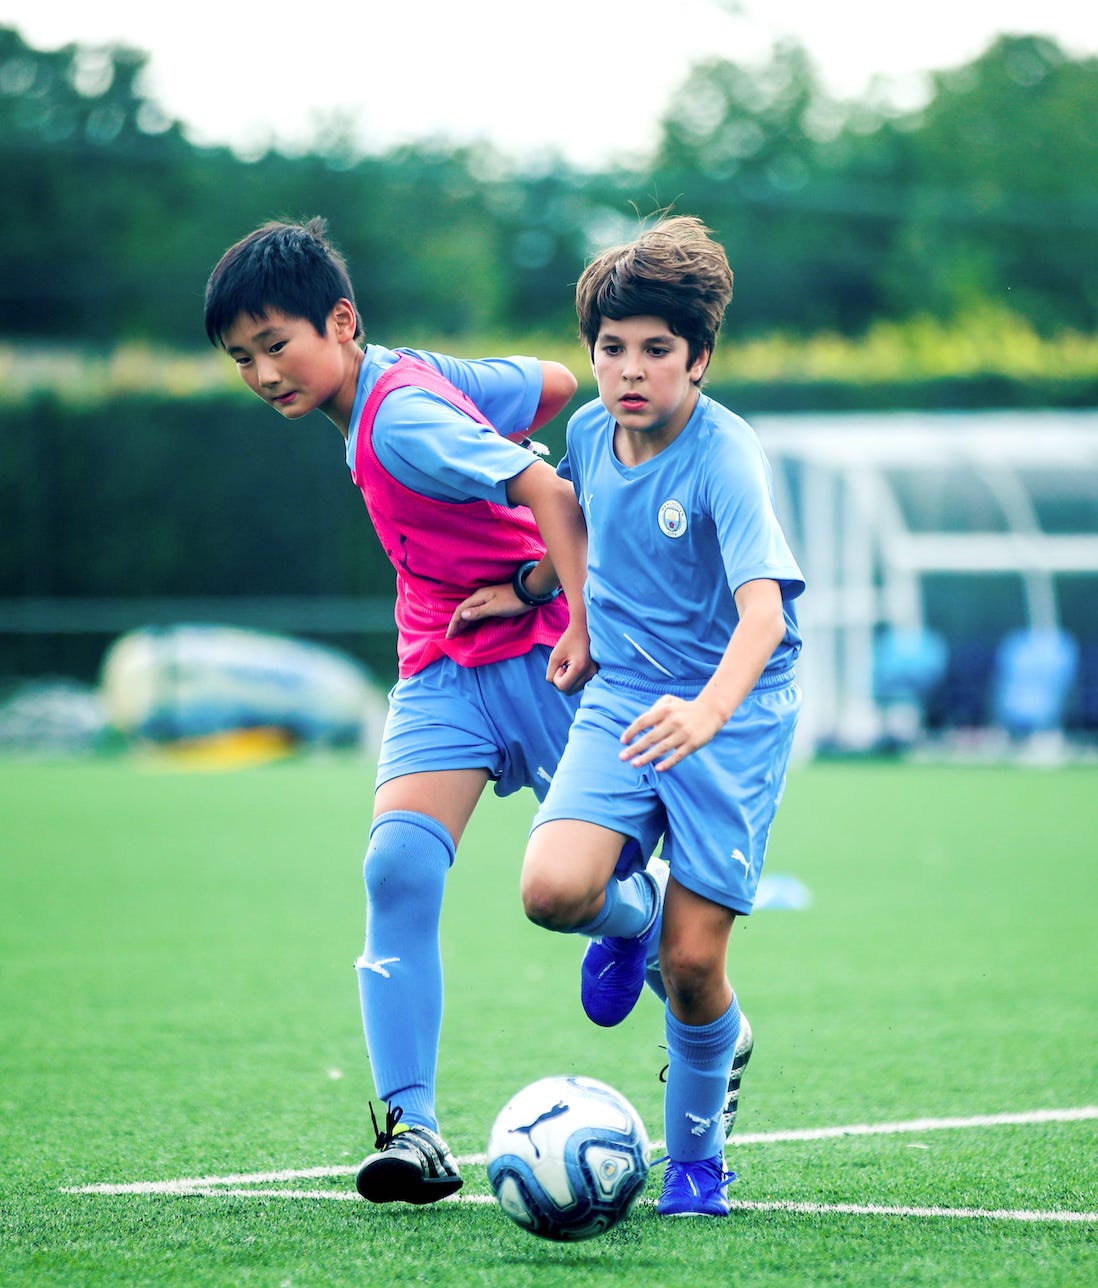 Two boys running after a football. They are both wearing a Manchester City Football School kit. One boy is pushing the other boy out of the way in order to reach the ball.